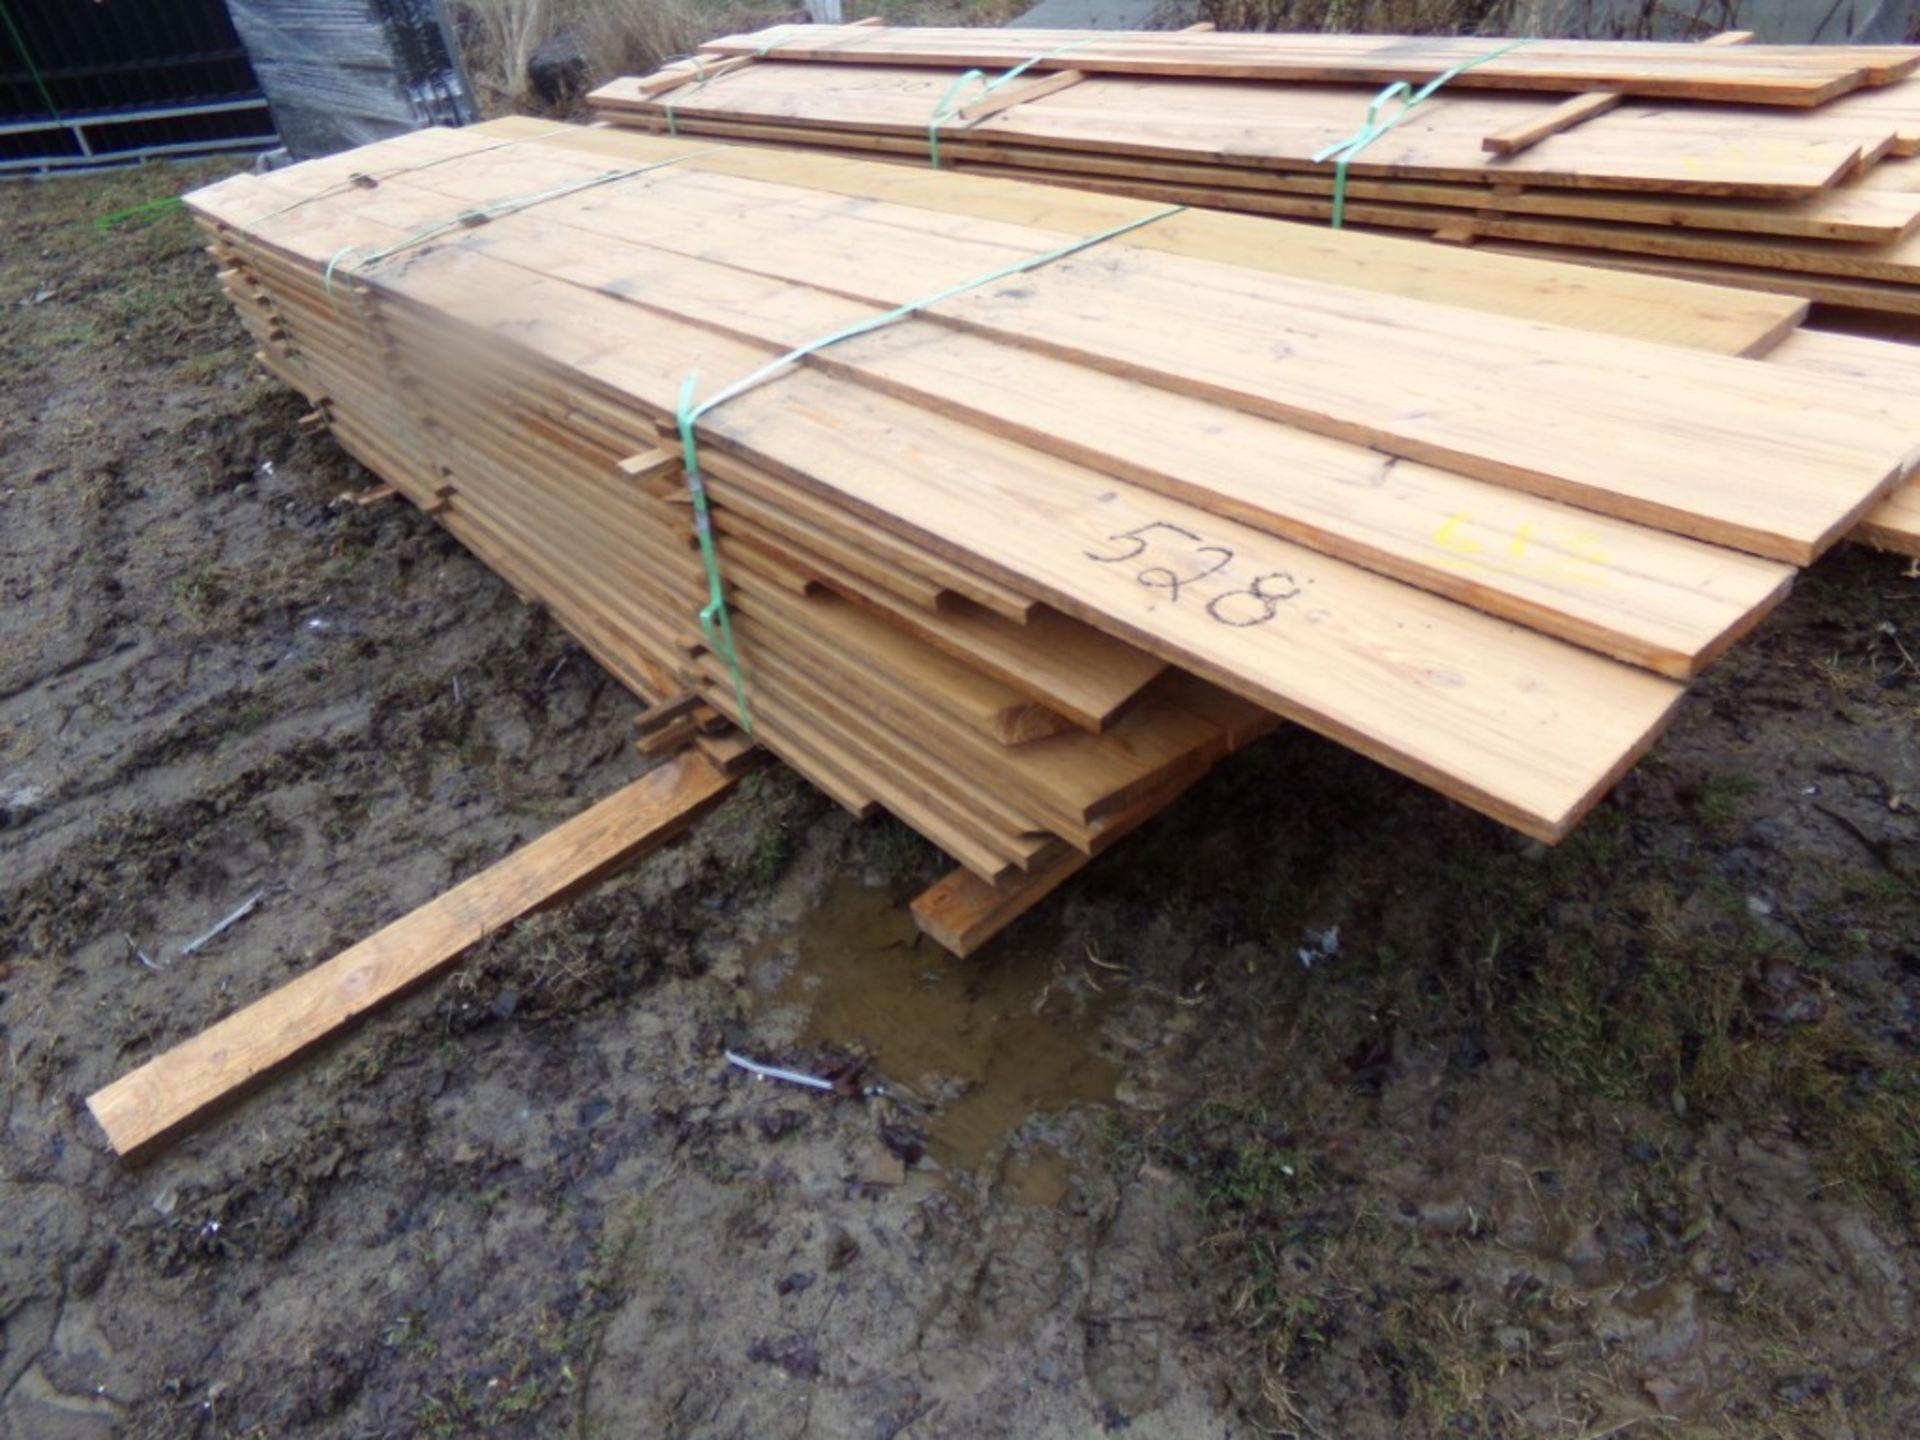 528 Board Feet Of 1'' Rough-Cut Lumber, Assorted Simensions,Sold By The Board (528 X BID PRICE)